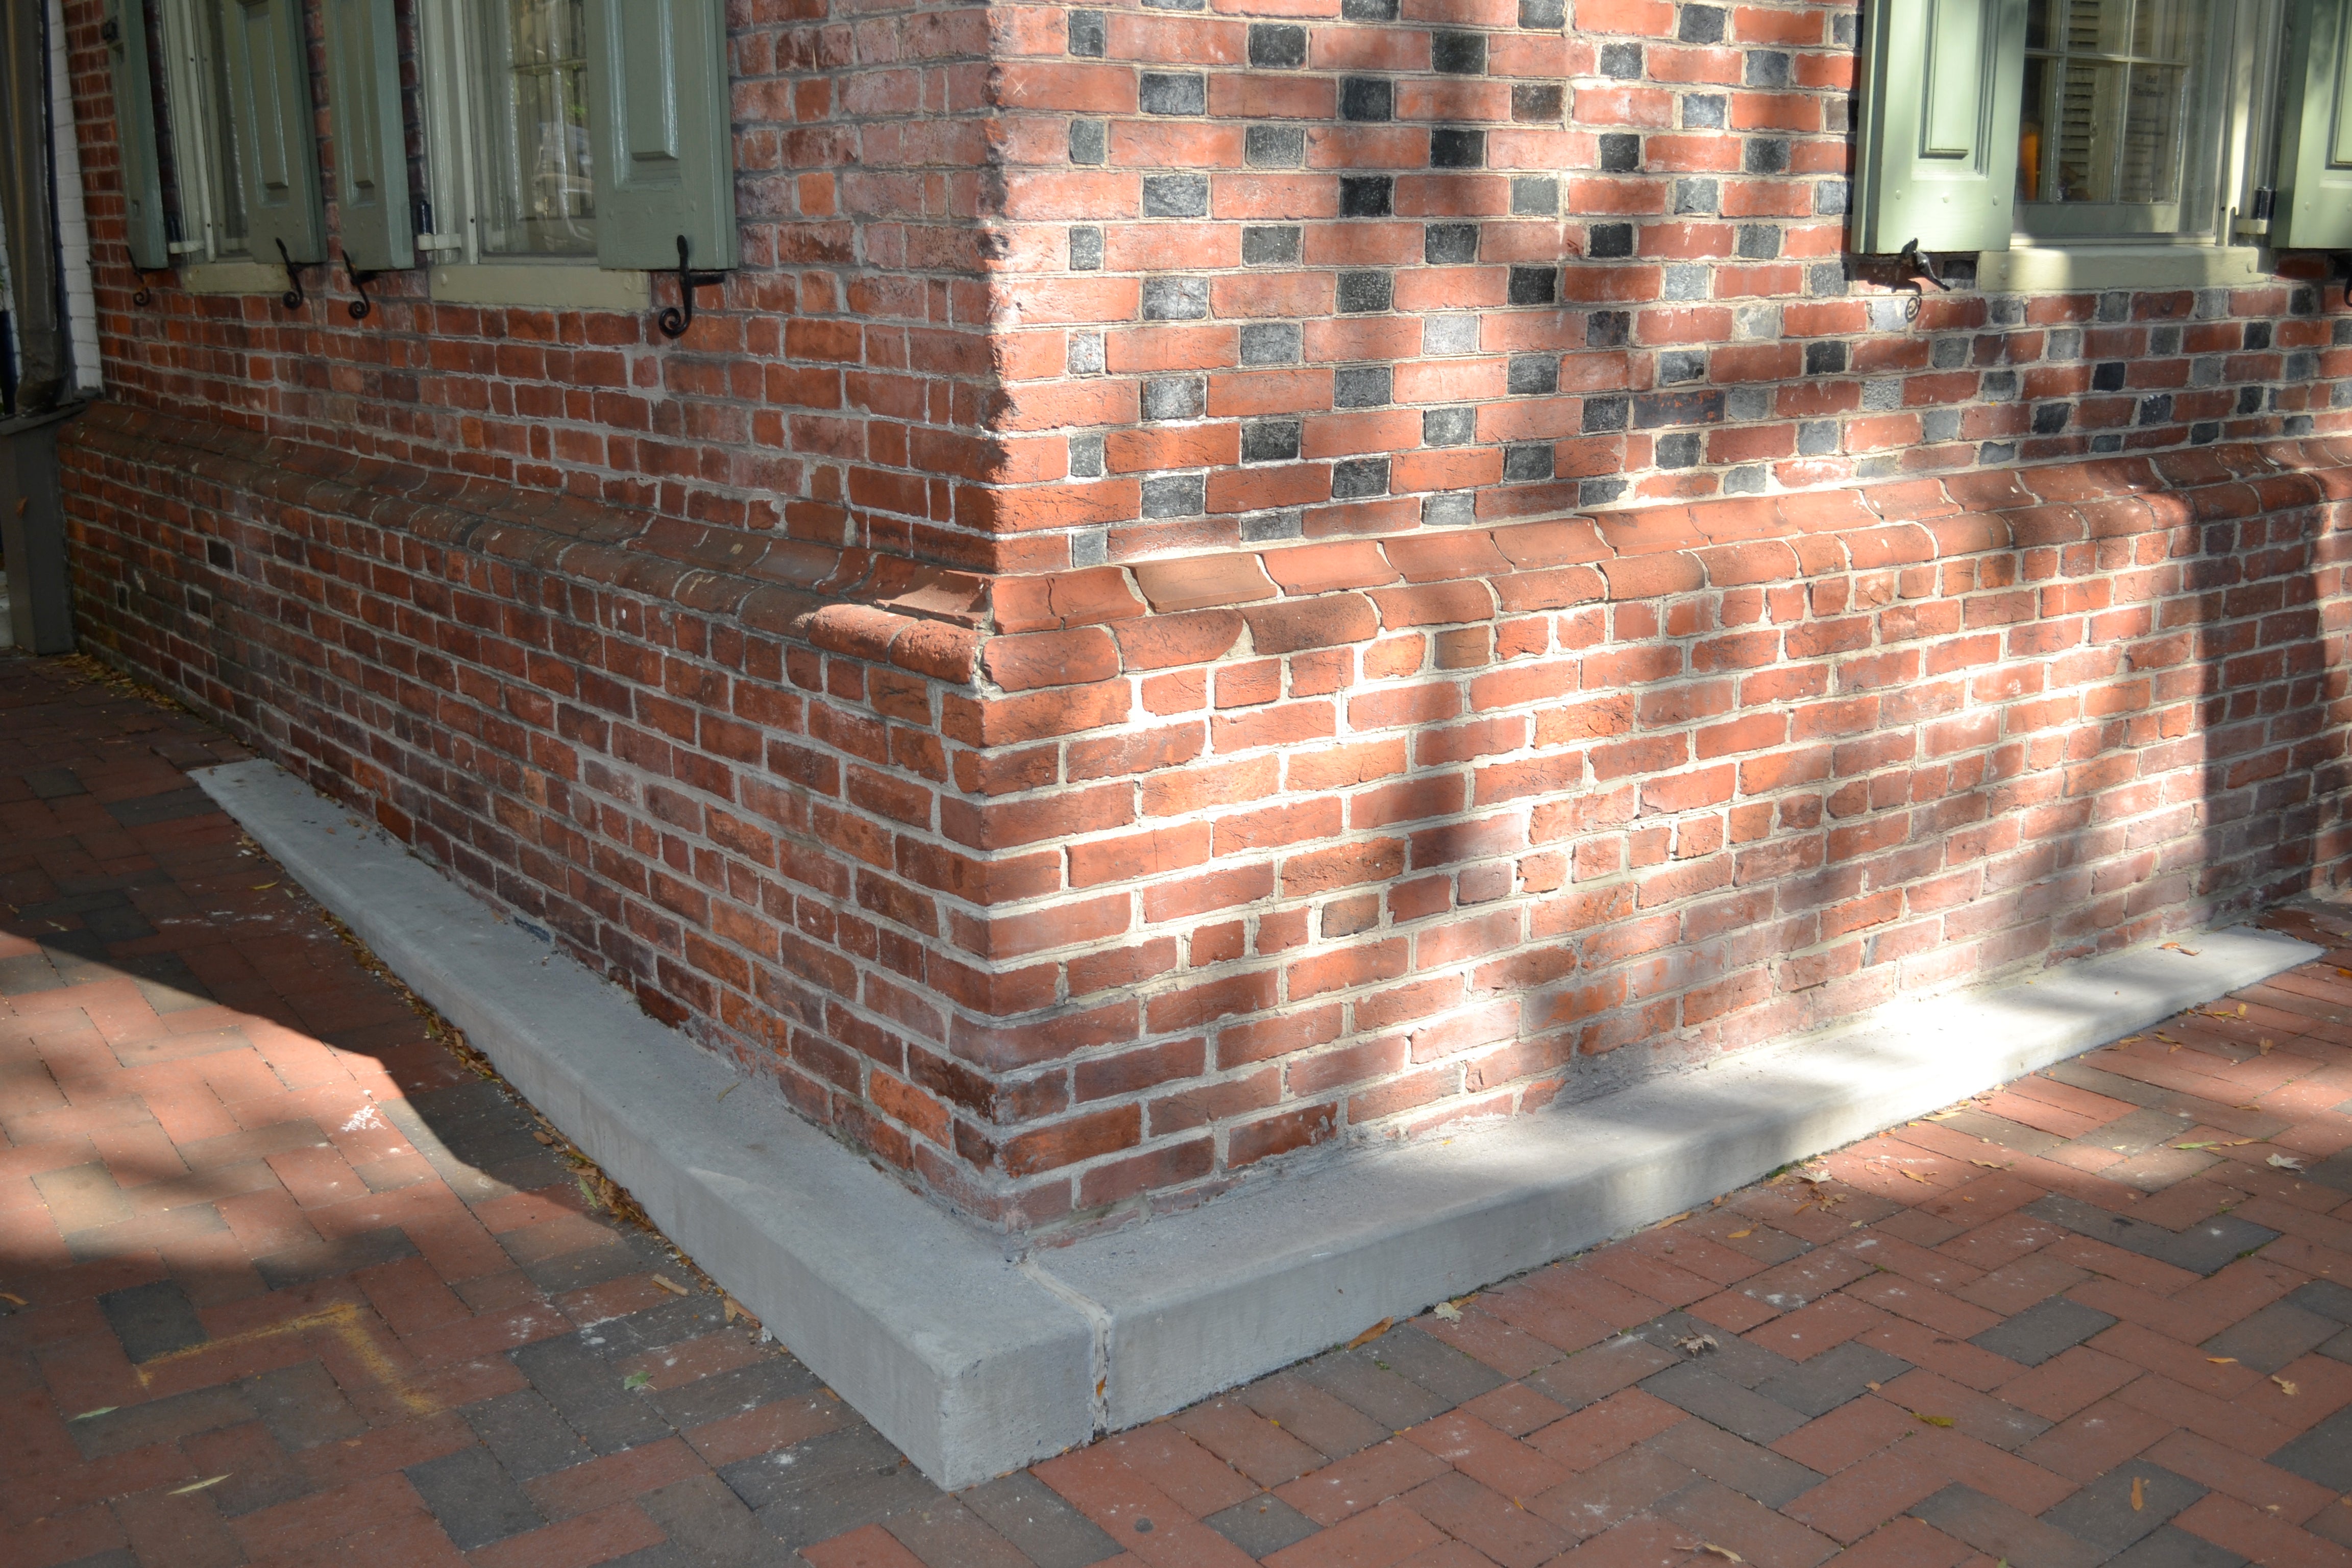 Residents were upset that the cheek wall was made out of concrete and didn't match the brick home or sidewalk